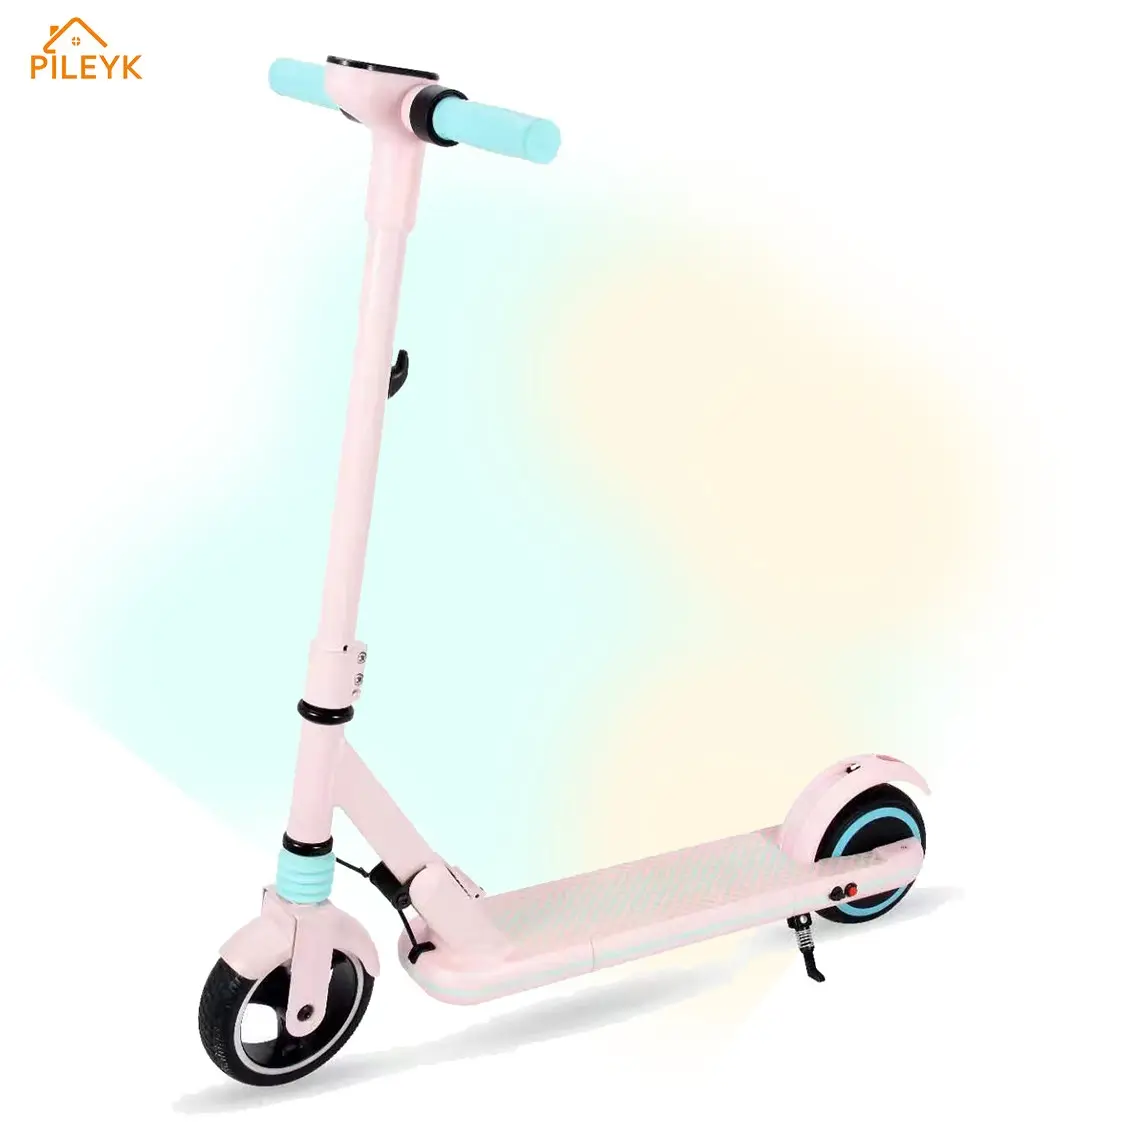 PILEYK Internet Celebrity Fast Electric Scooter Low Battery Protection Kids Electric Scooter Pink Wheel Scooter For Kid